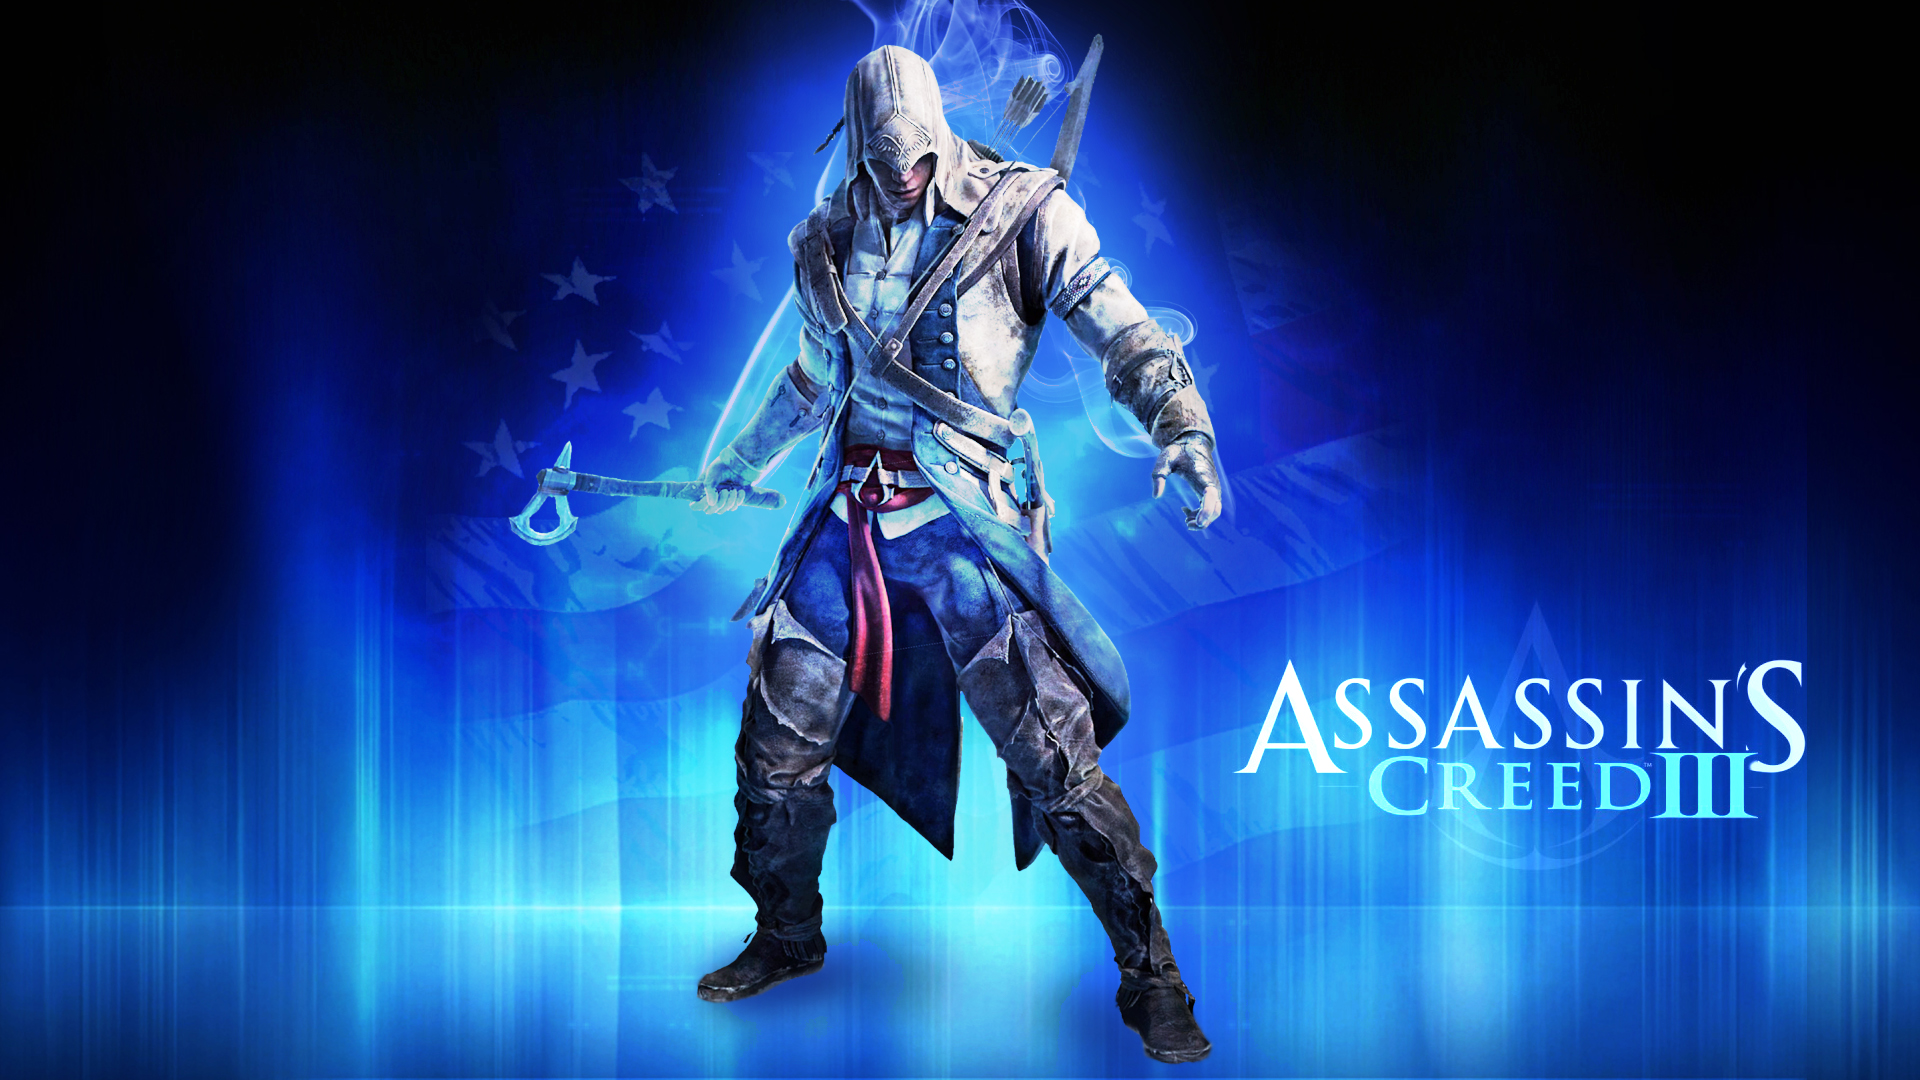 HD wallpaper assassin's creed, assassin's creed iii, video game